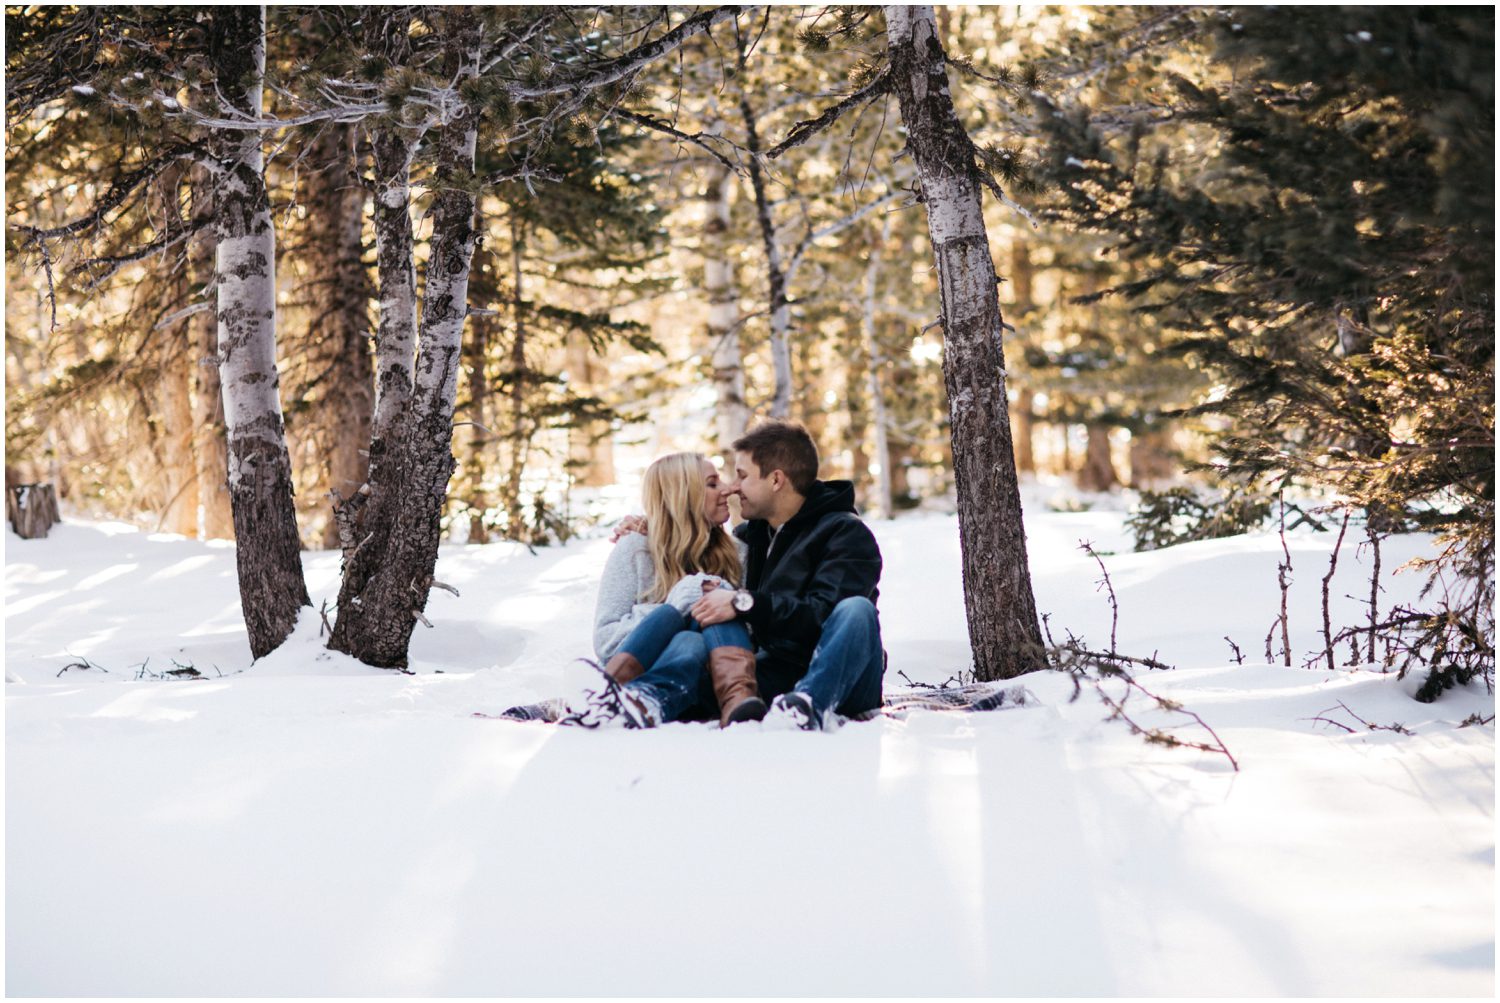 Engagement Session at Brainard Lake in Boulder Colorado  , Boulder Colorado Photographer, Boulder Wedding Photographer, Boulder engagement photographer, Boulder engagement photos, Engagement session locations in Boulder, Colorado winter engagement session, Winter engagement photos, Mountain engagement session, Snowy engagement photos, Engagement photos with dogs, Save the date, Save the data photo ideas, Photo session with dogs, St Bernard, Brainard Lake, Colorado, Boulder Colorado, Nederland Colorado, Ward Colorado, Colorado wedding, Colorado photographer